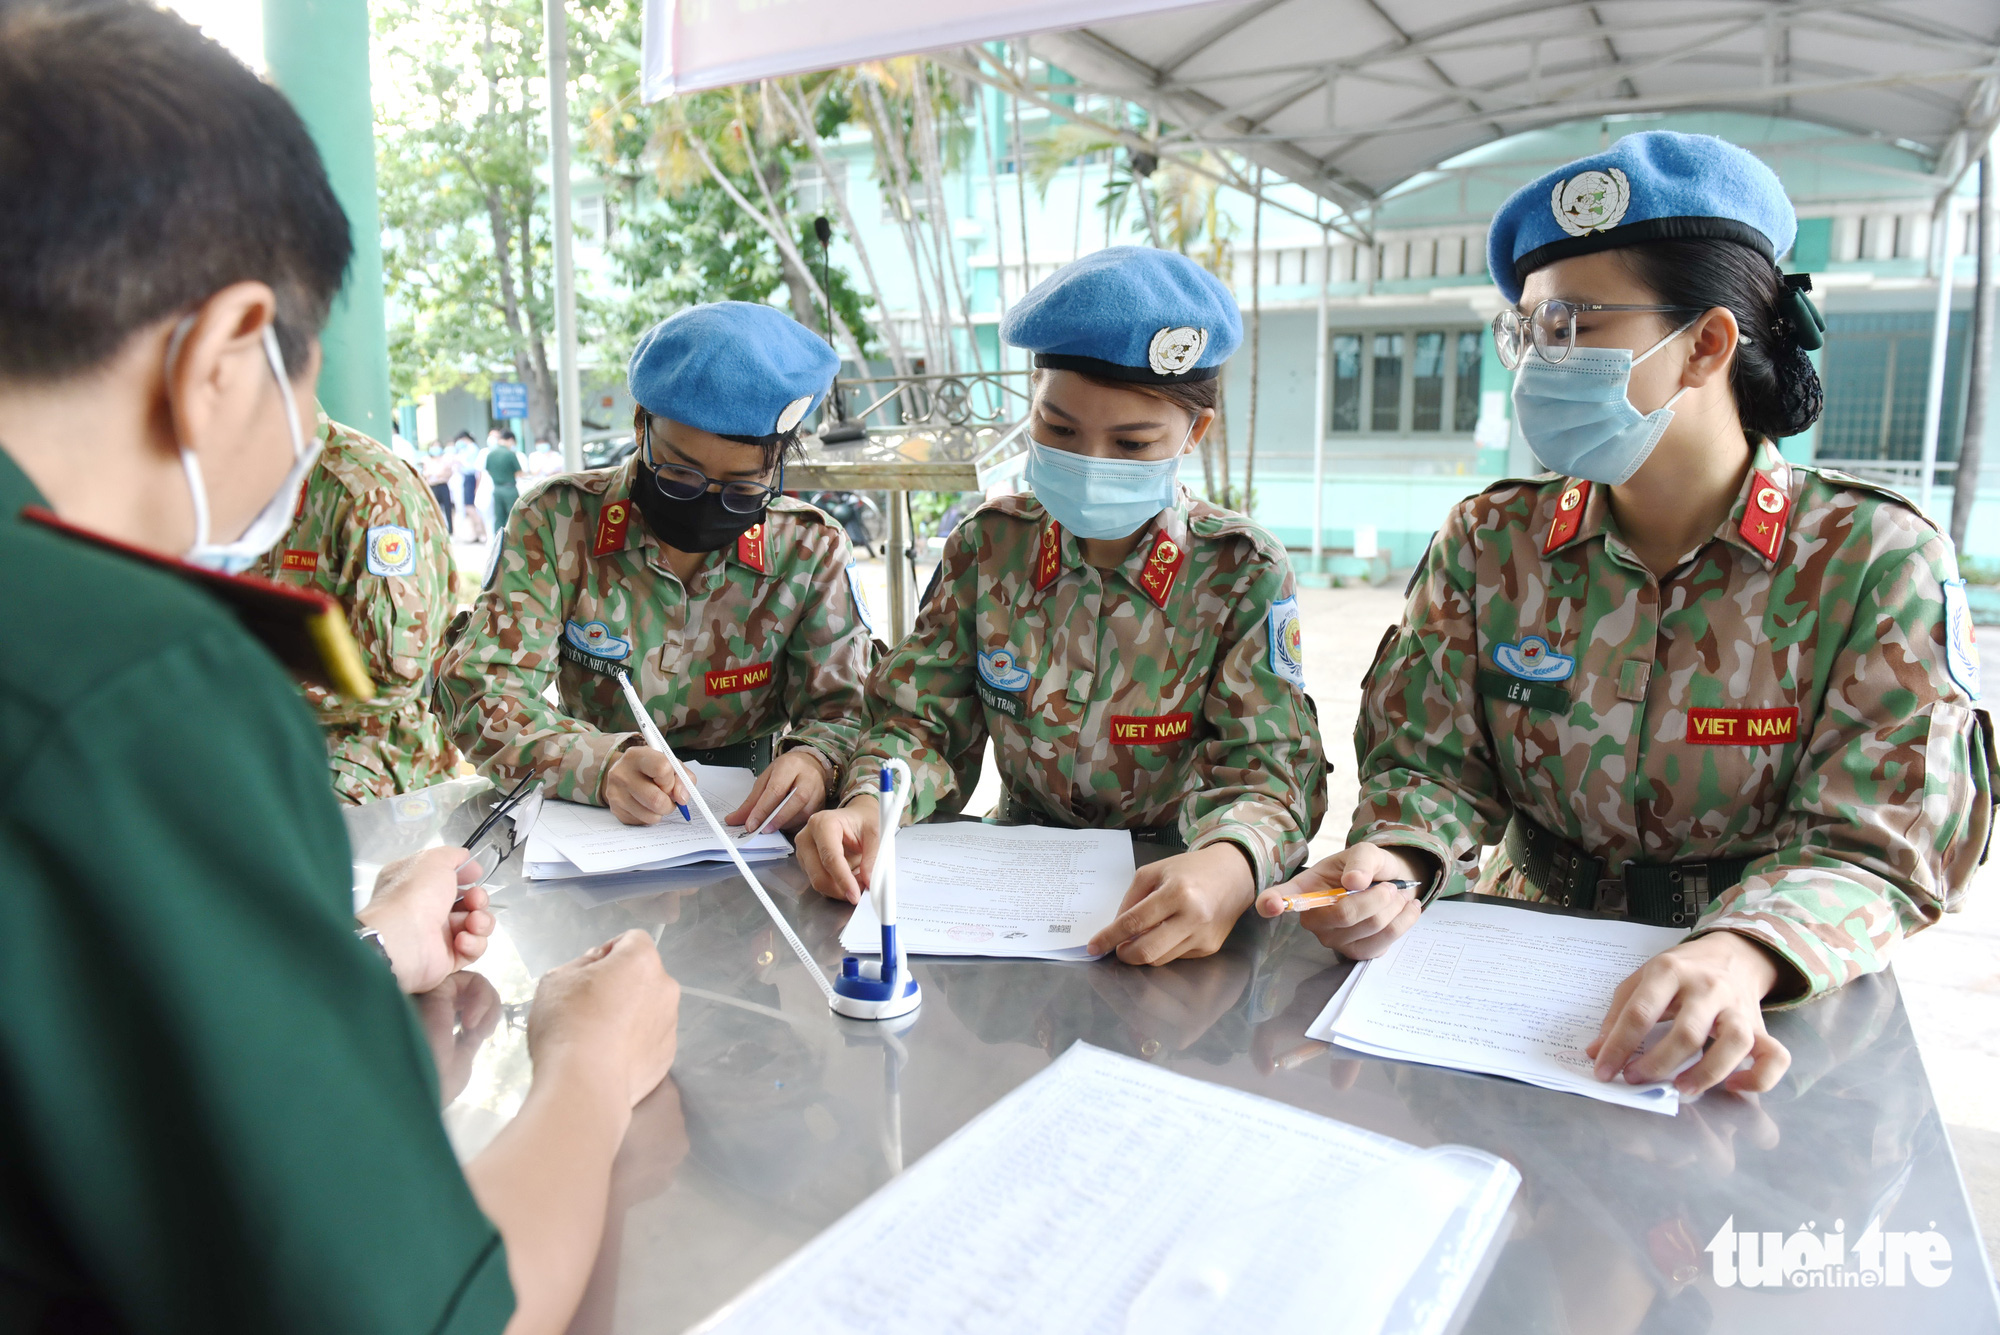 Vietnamese soldiers administered COVID-19 vaccine prior to UN peacekeeping mission in South Sudan